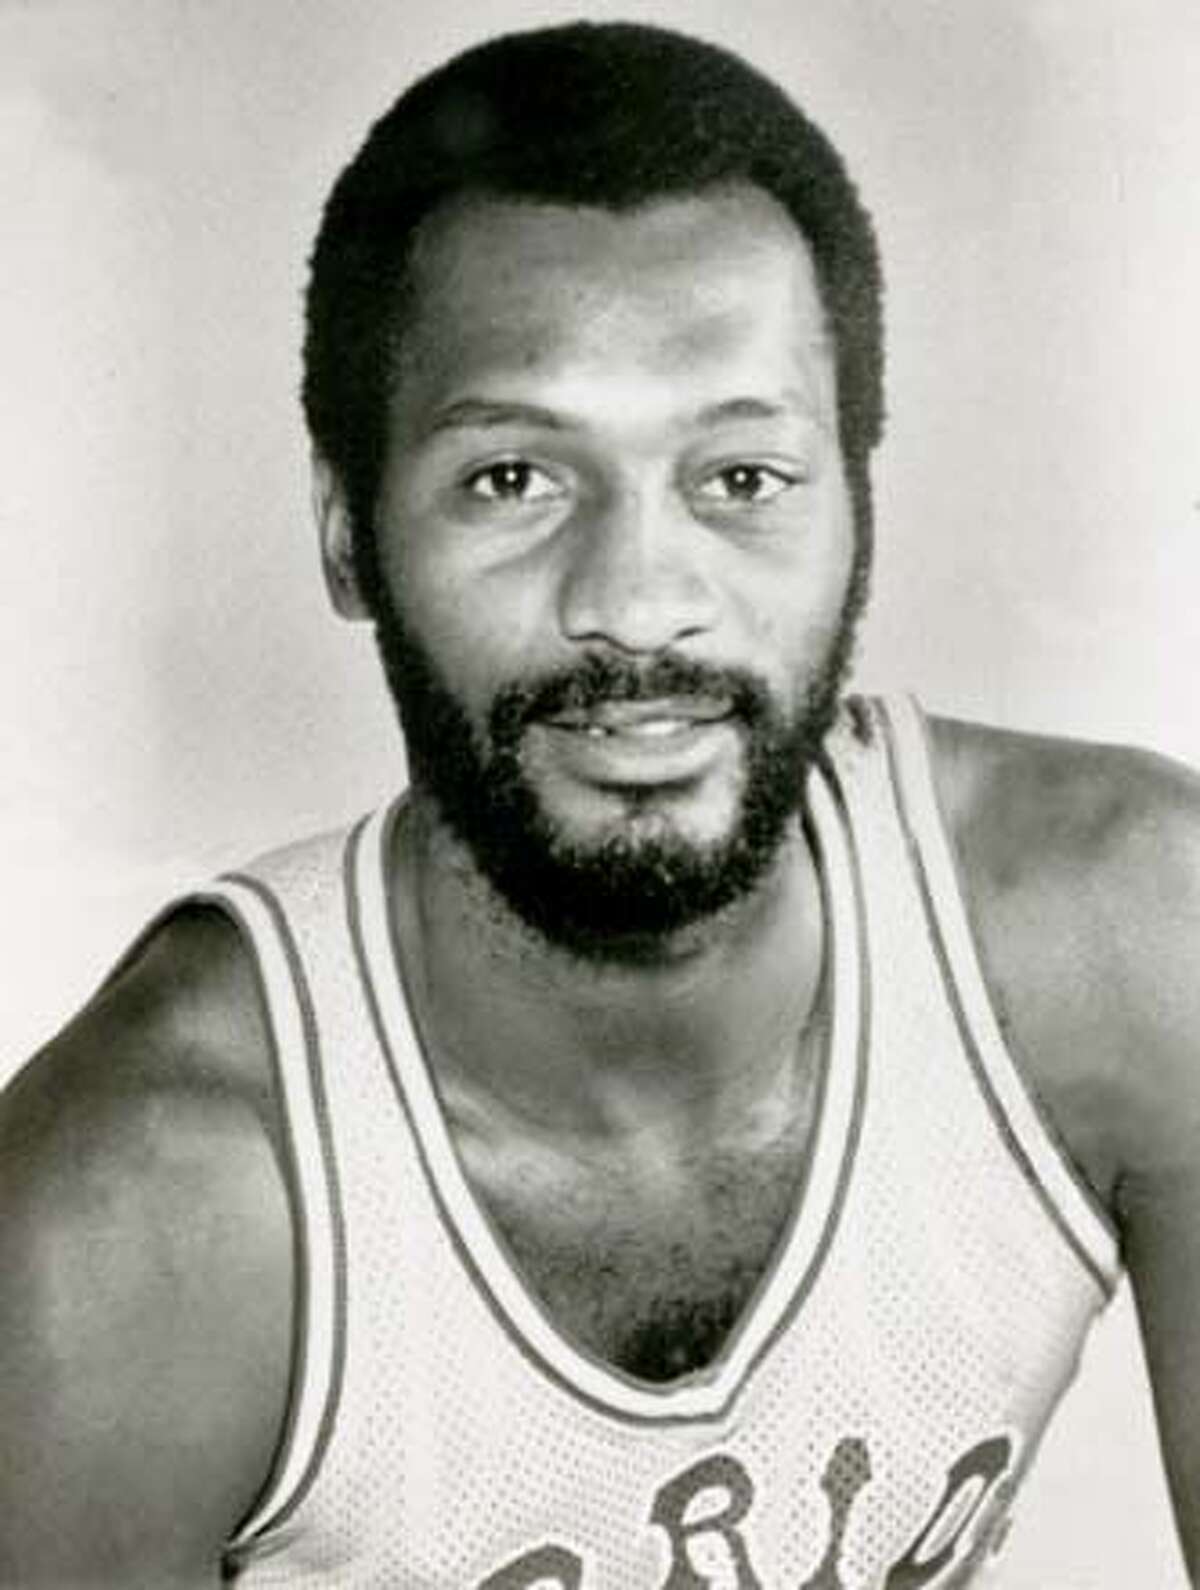 CHARLES JOHNSON 1949-2007 / 'One of the best' by bay / A star as prep,  collegian and NBA champ